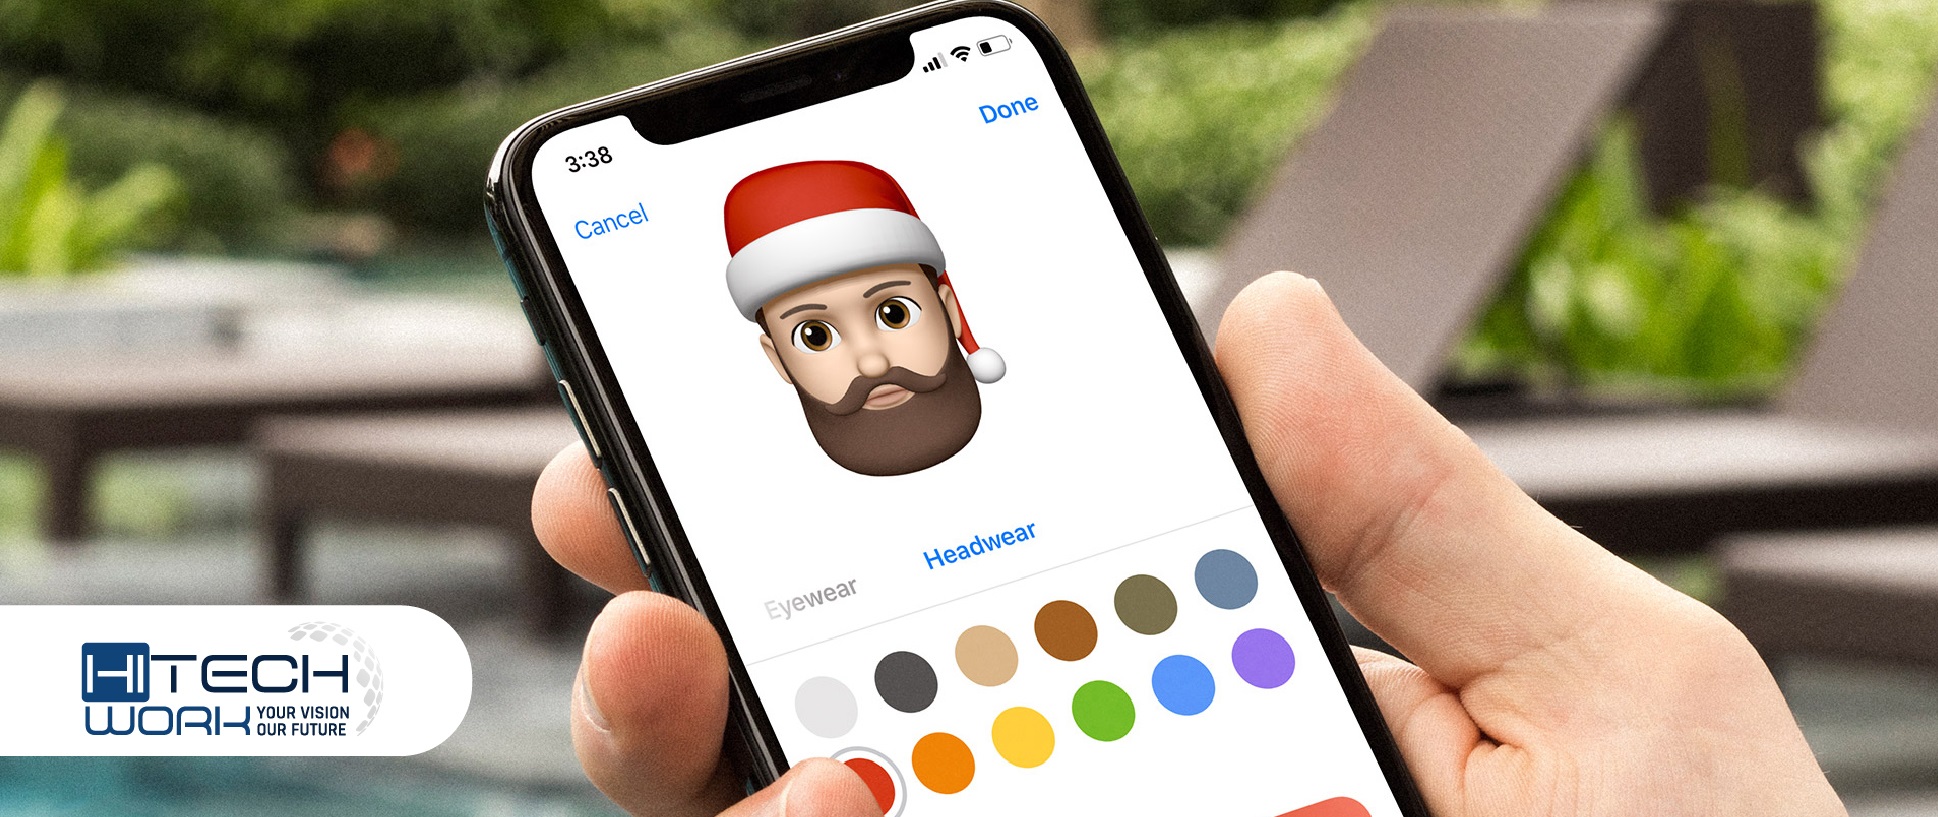 How to Set an Avatar on an iPhone 9 Simple Steps